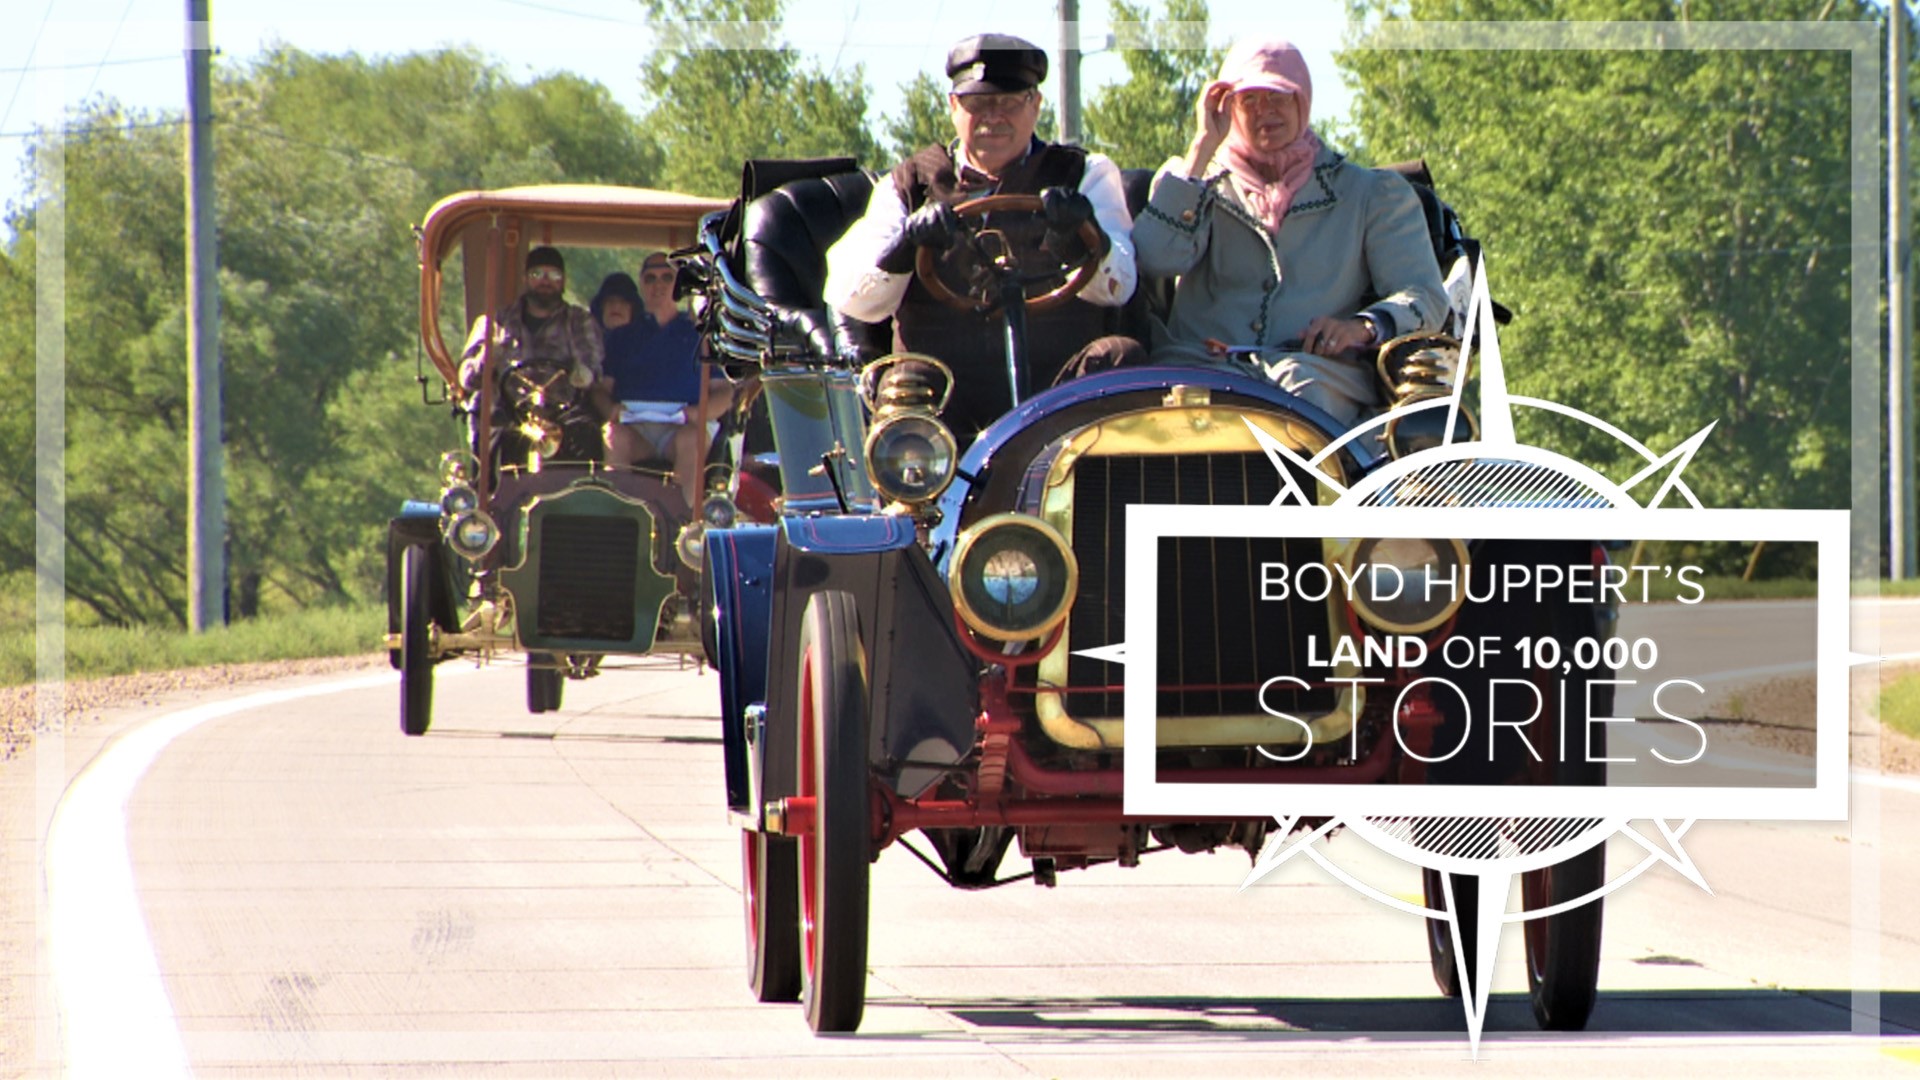 The New London to New Brighton Antique Car Run brings the oldest cars on the road to the Minnesota countryside.